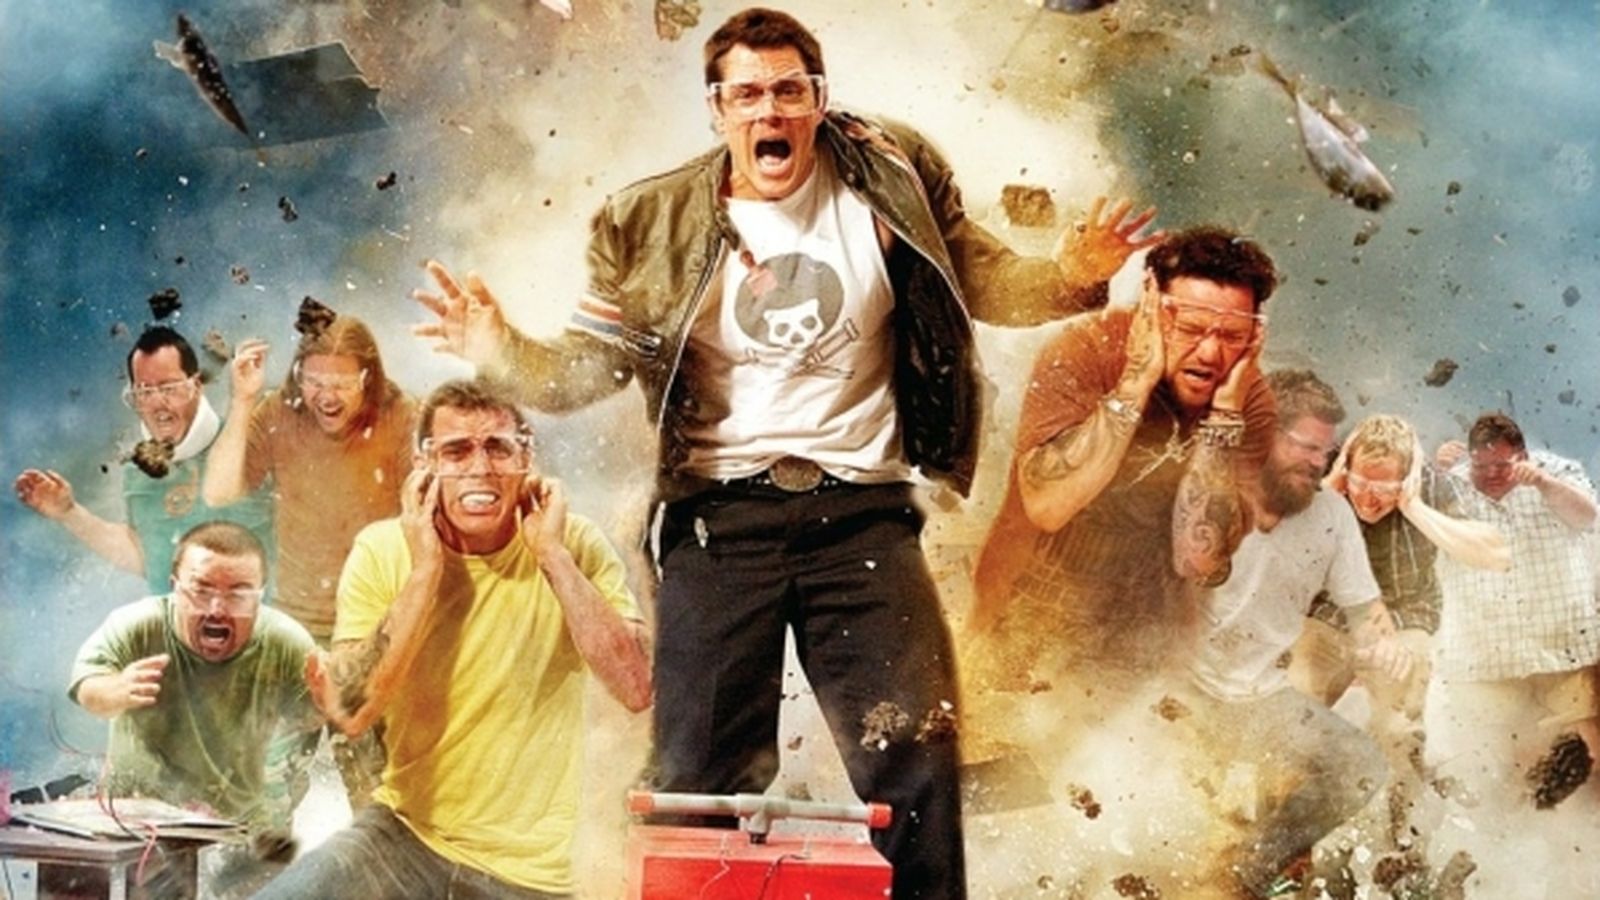 Amazing Background Wallpaper Jackass HDq Cover